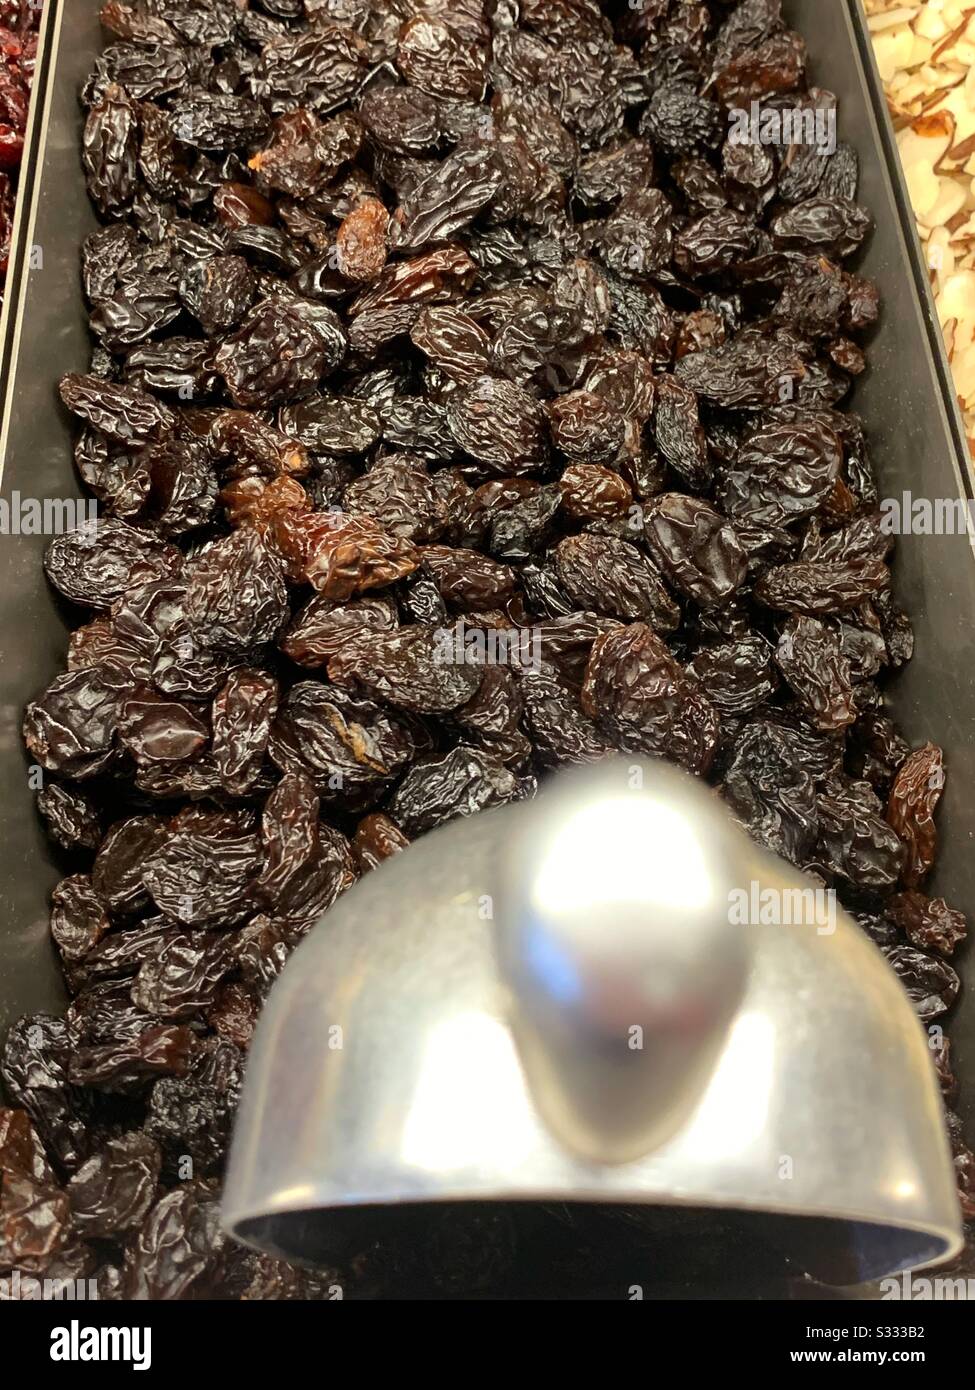 Buffet dish full of raisins with a metal scoop in a trail mix bar Stock Photo